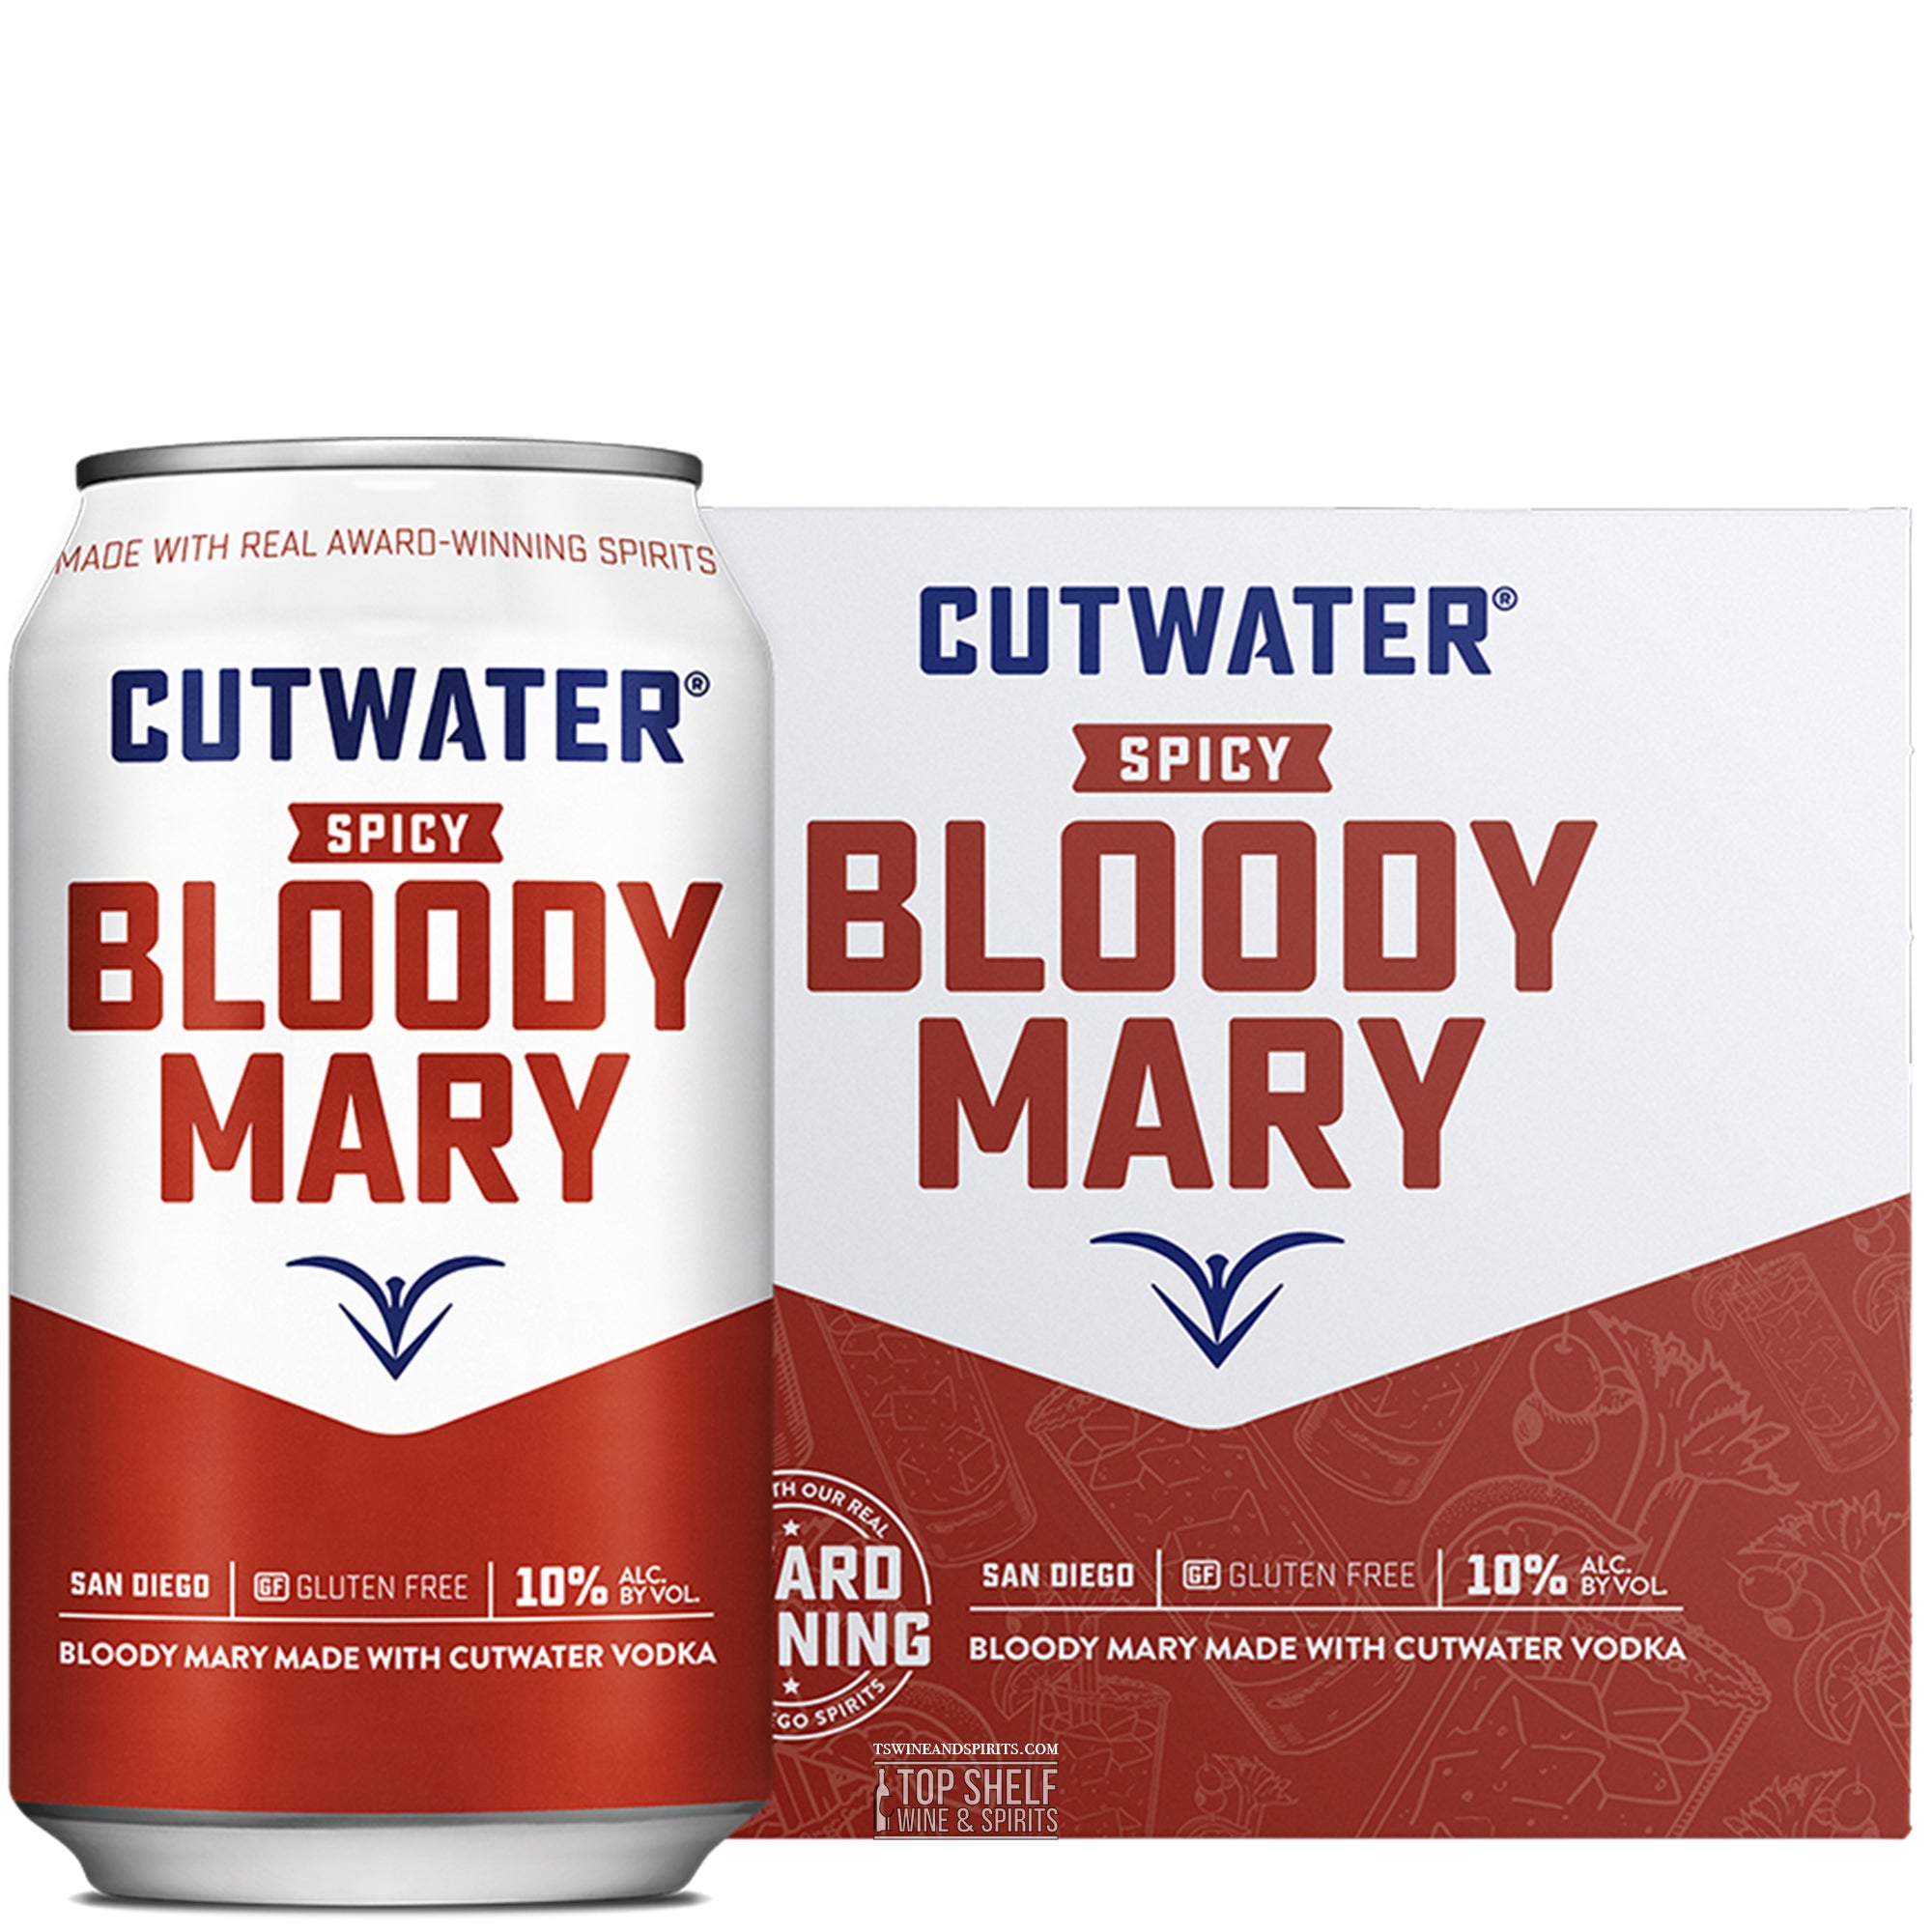 Cutwater Spicy Bloody Mary 4 pack